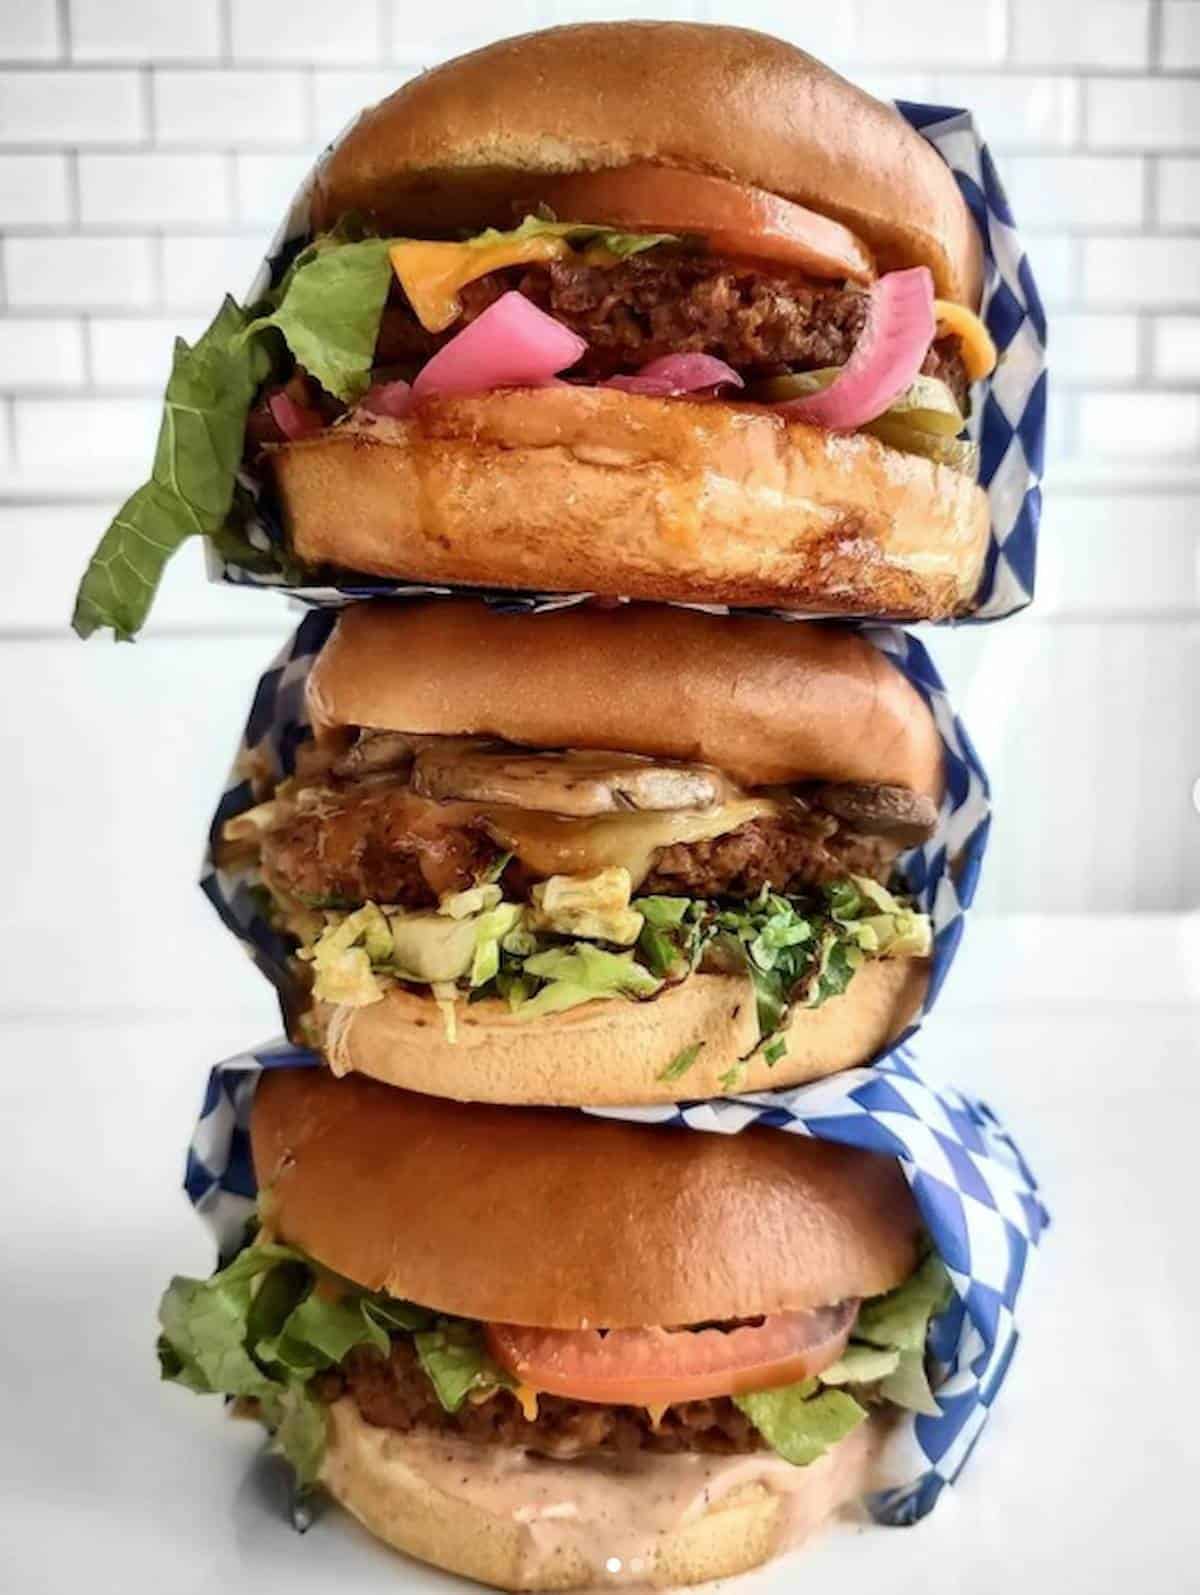 Three vegan burgers with various toppings stacked on one another.